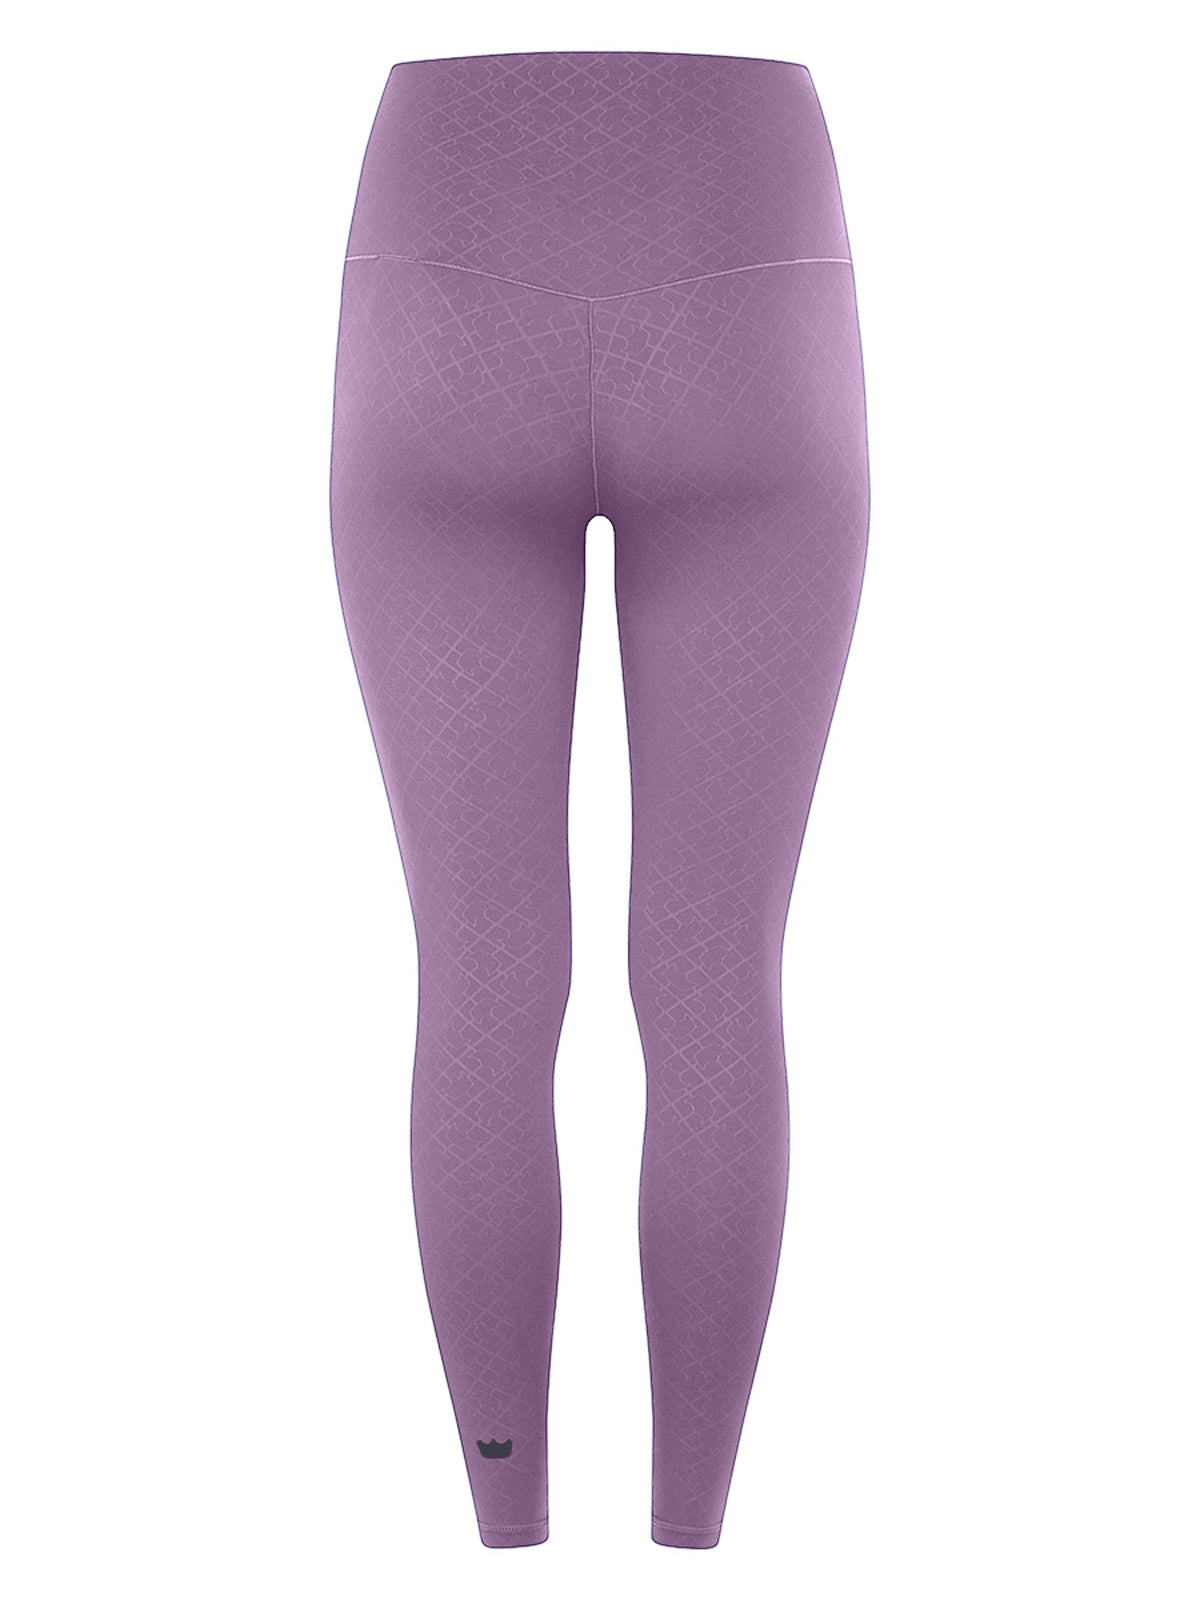 InvisiSweat - 3/4 Length Crop Tights - Steel Violet